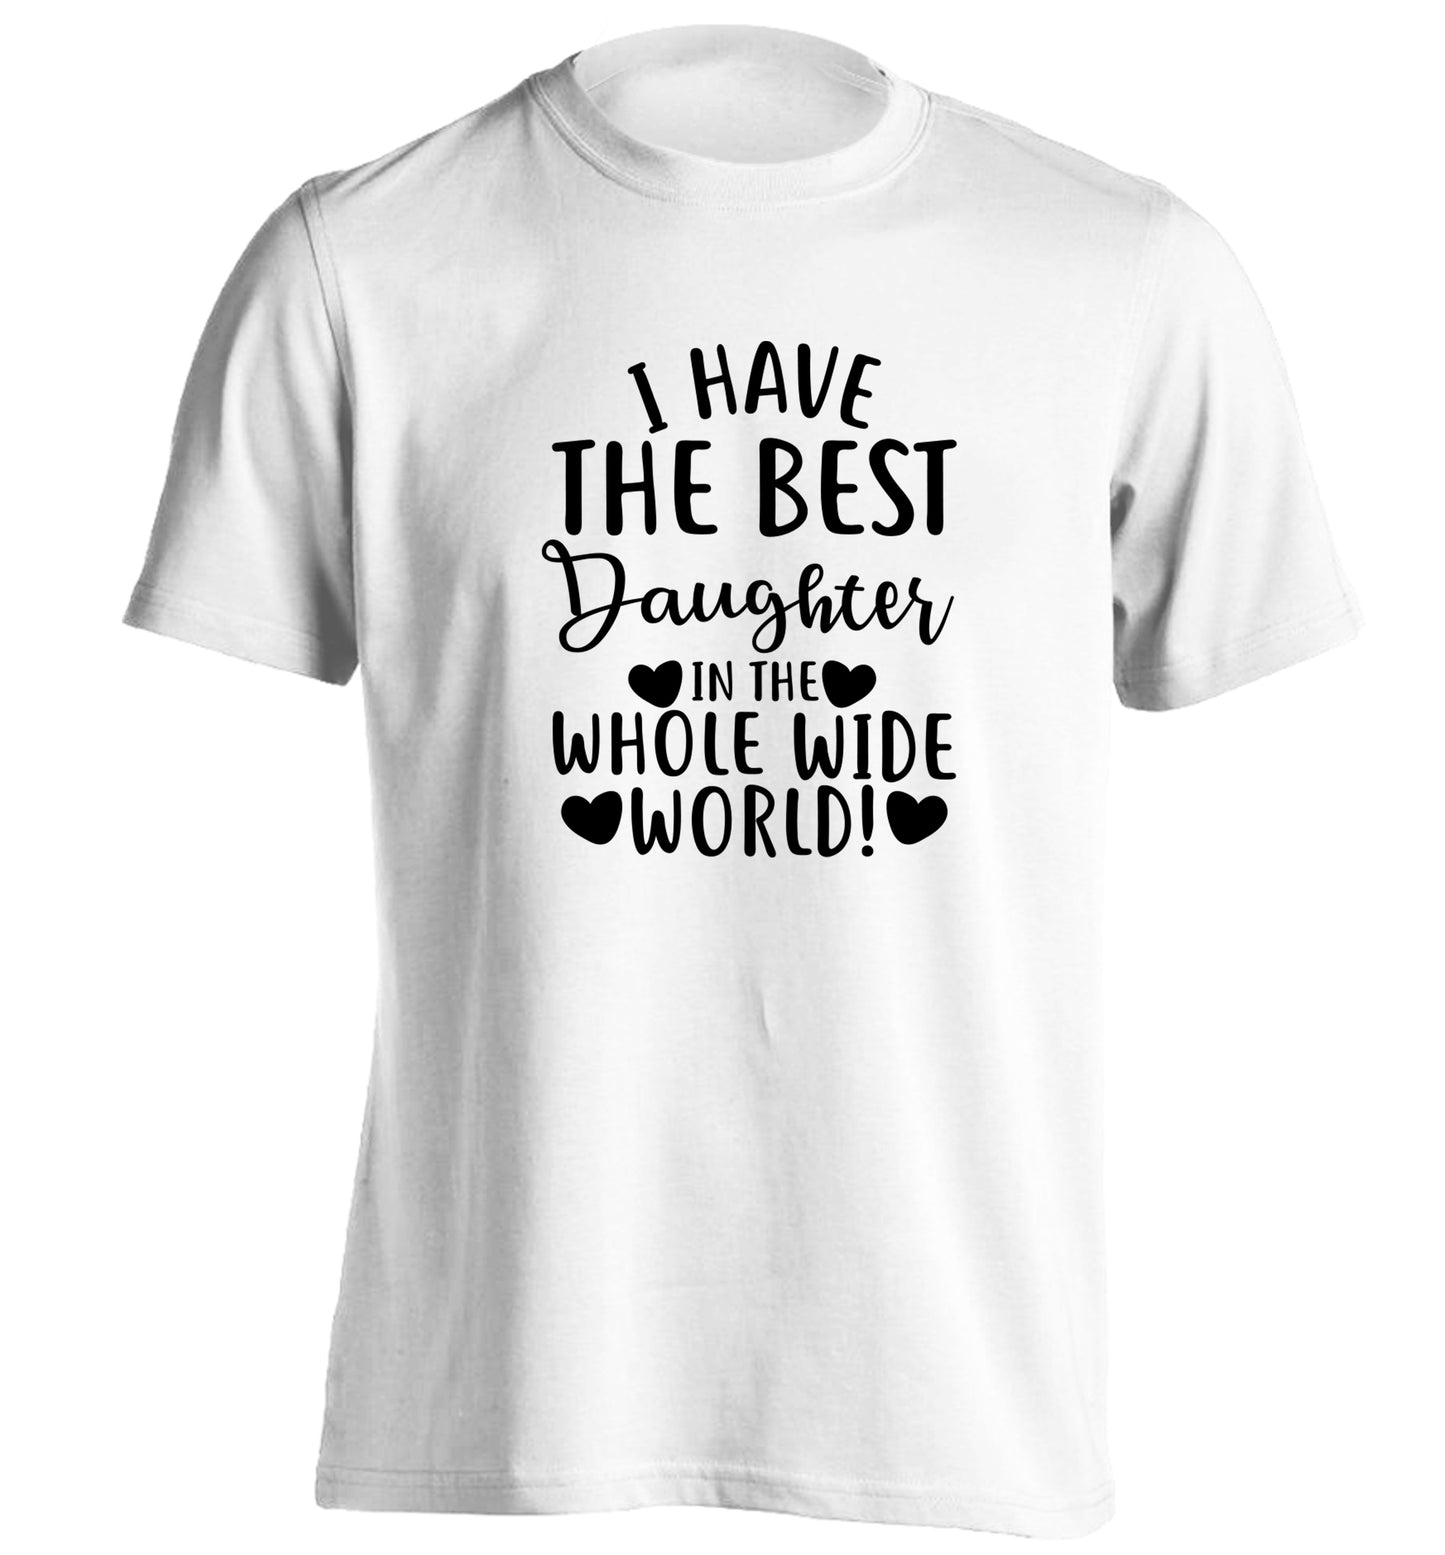 I have the best daughter in the whole wide world! adults unisex white Tshirt 2XL